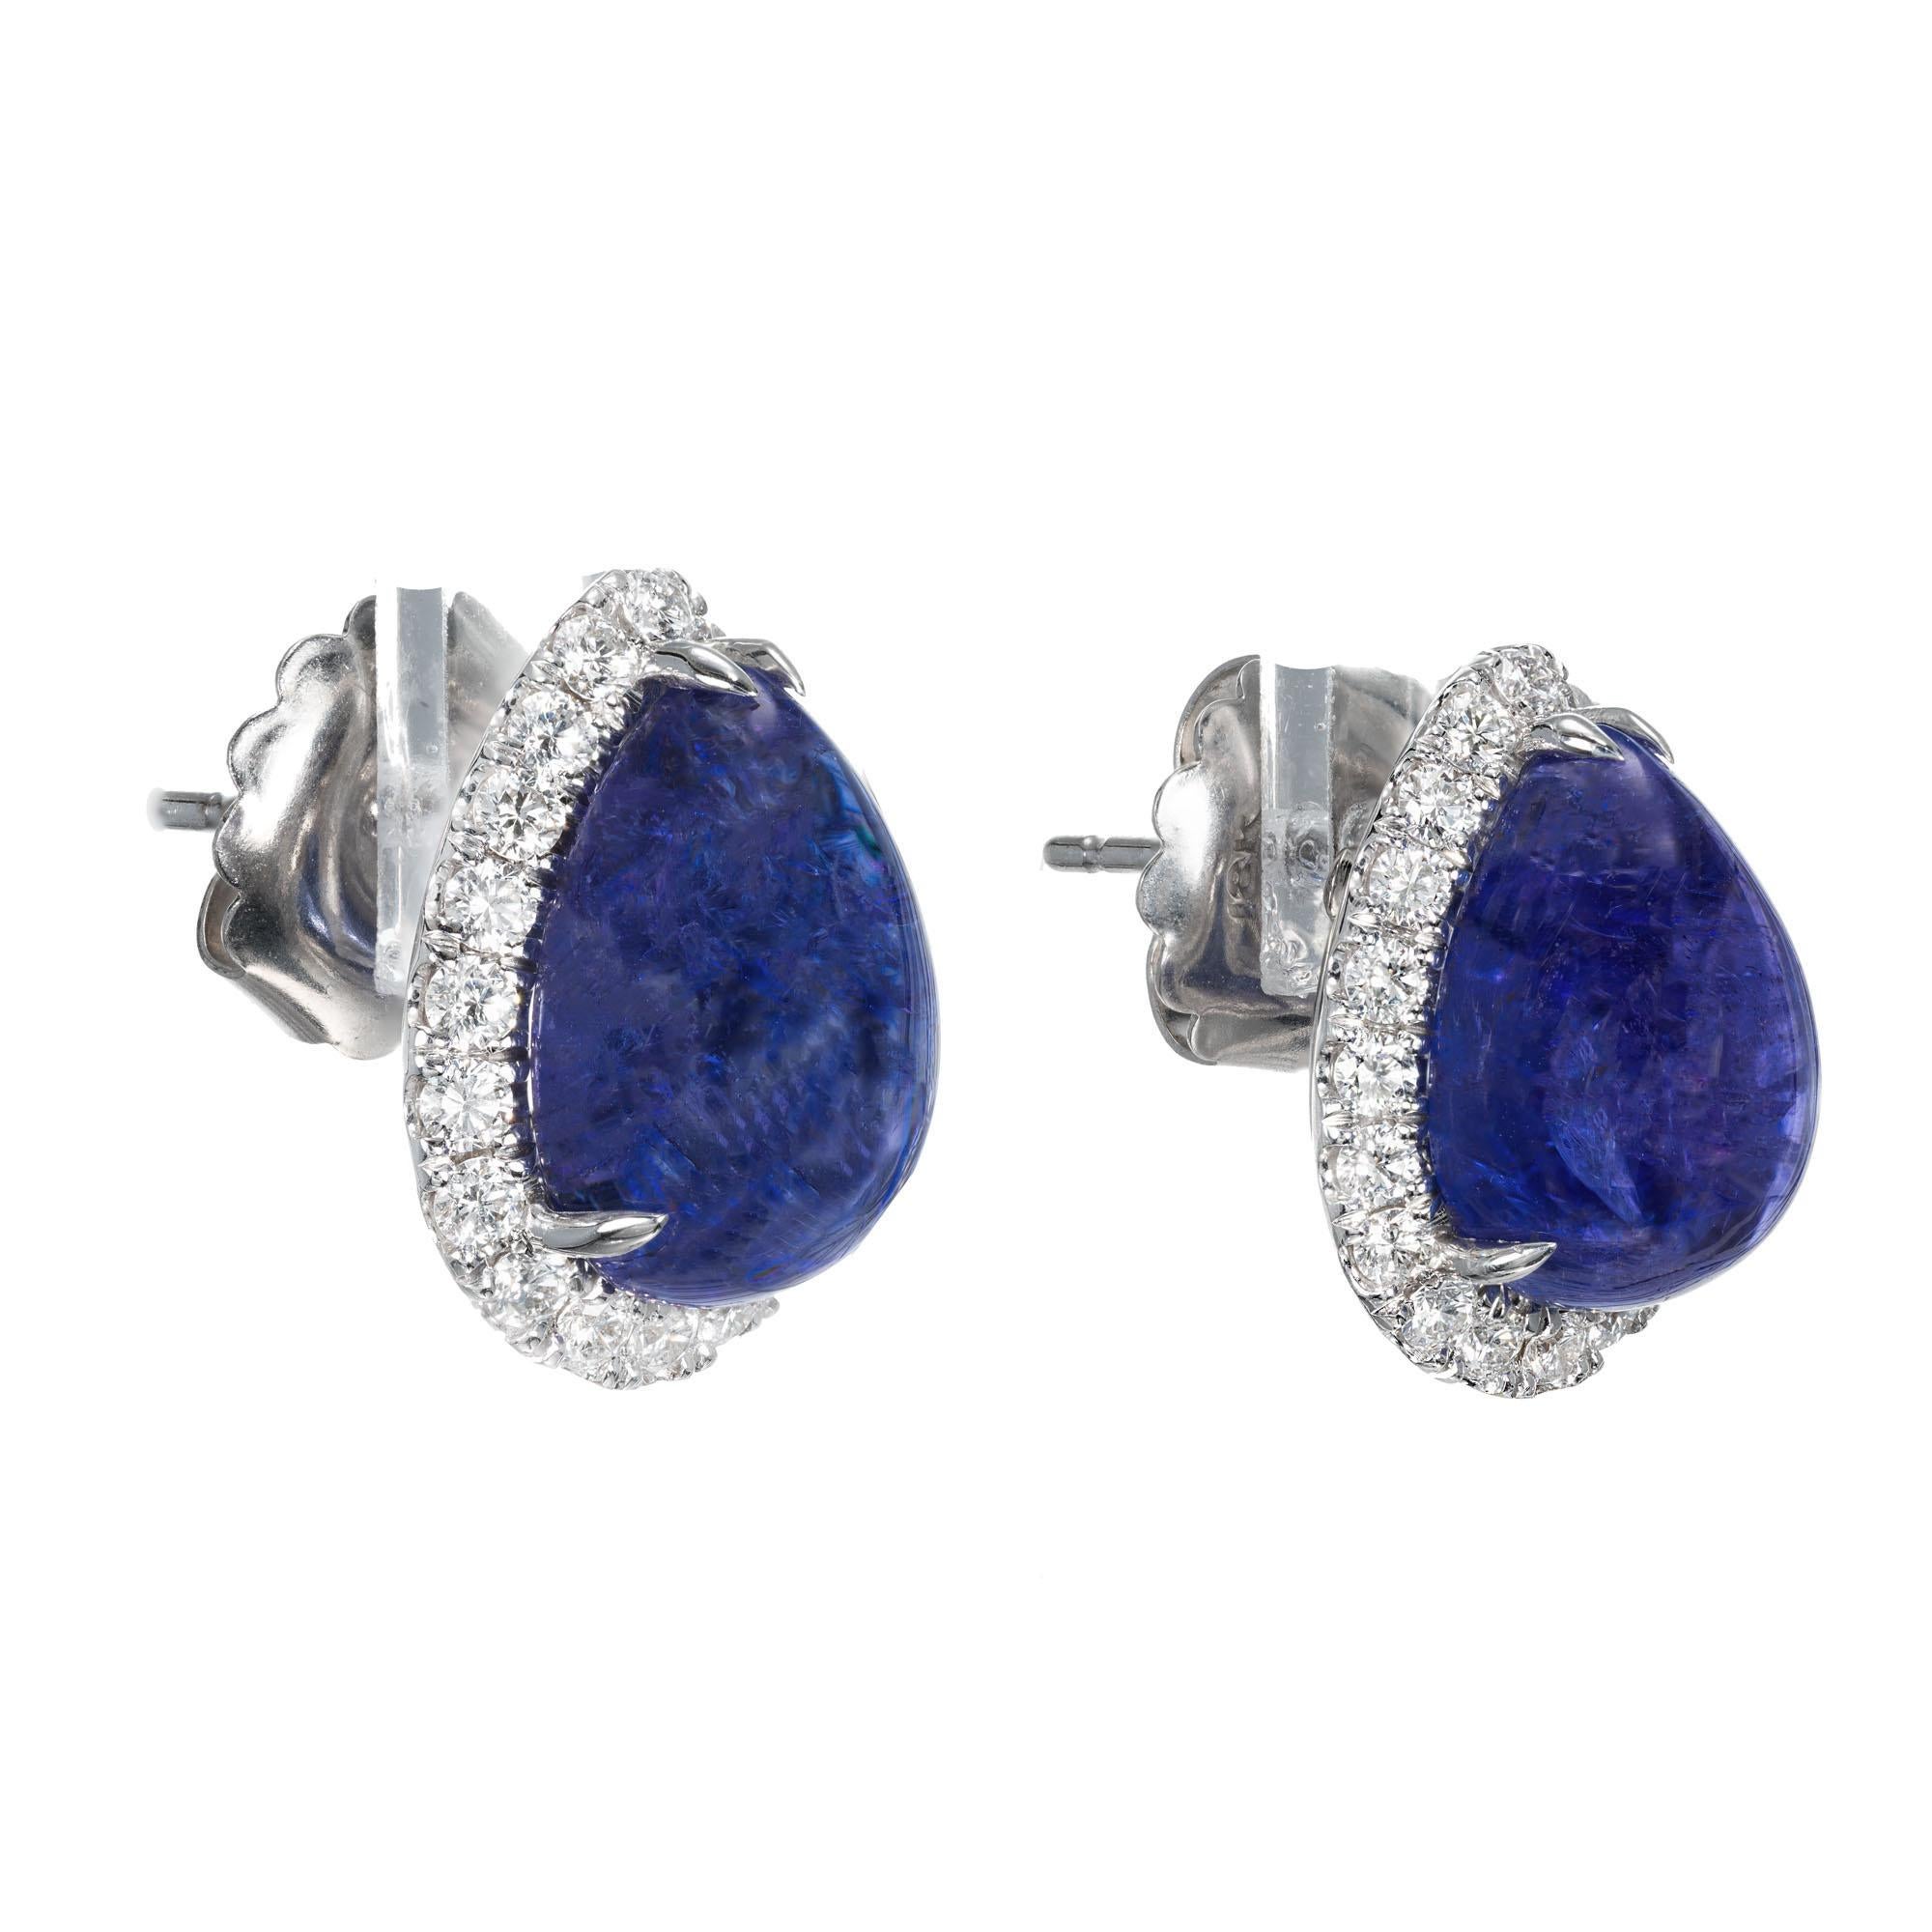 Two blue cabochon tanzanite in a handmade diamond halo 18k white gold earrings from the Peter Suchy Workshop.

2 pear shaped cabochon blue tanzanite, I approx. 13.70cts
40 round brilliant cut diamonds, F VS approx. .80cts
18k white gold 
Stamped: